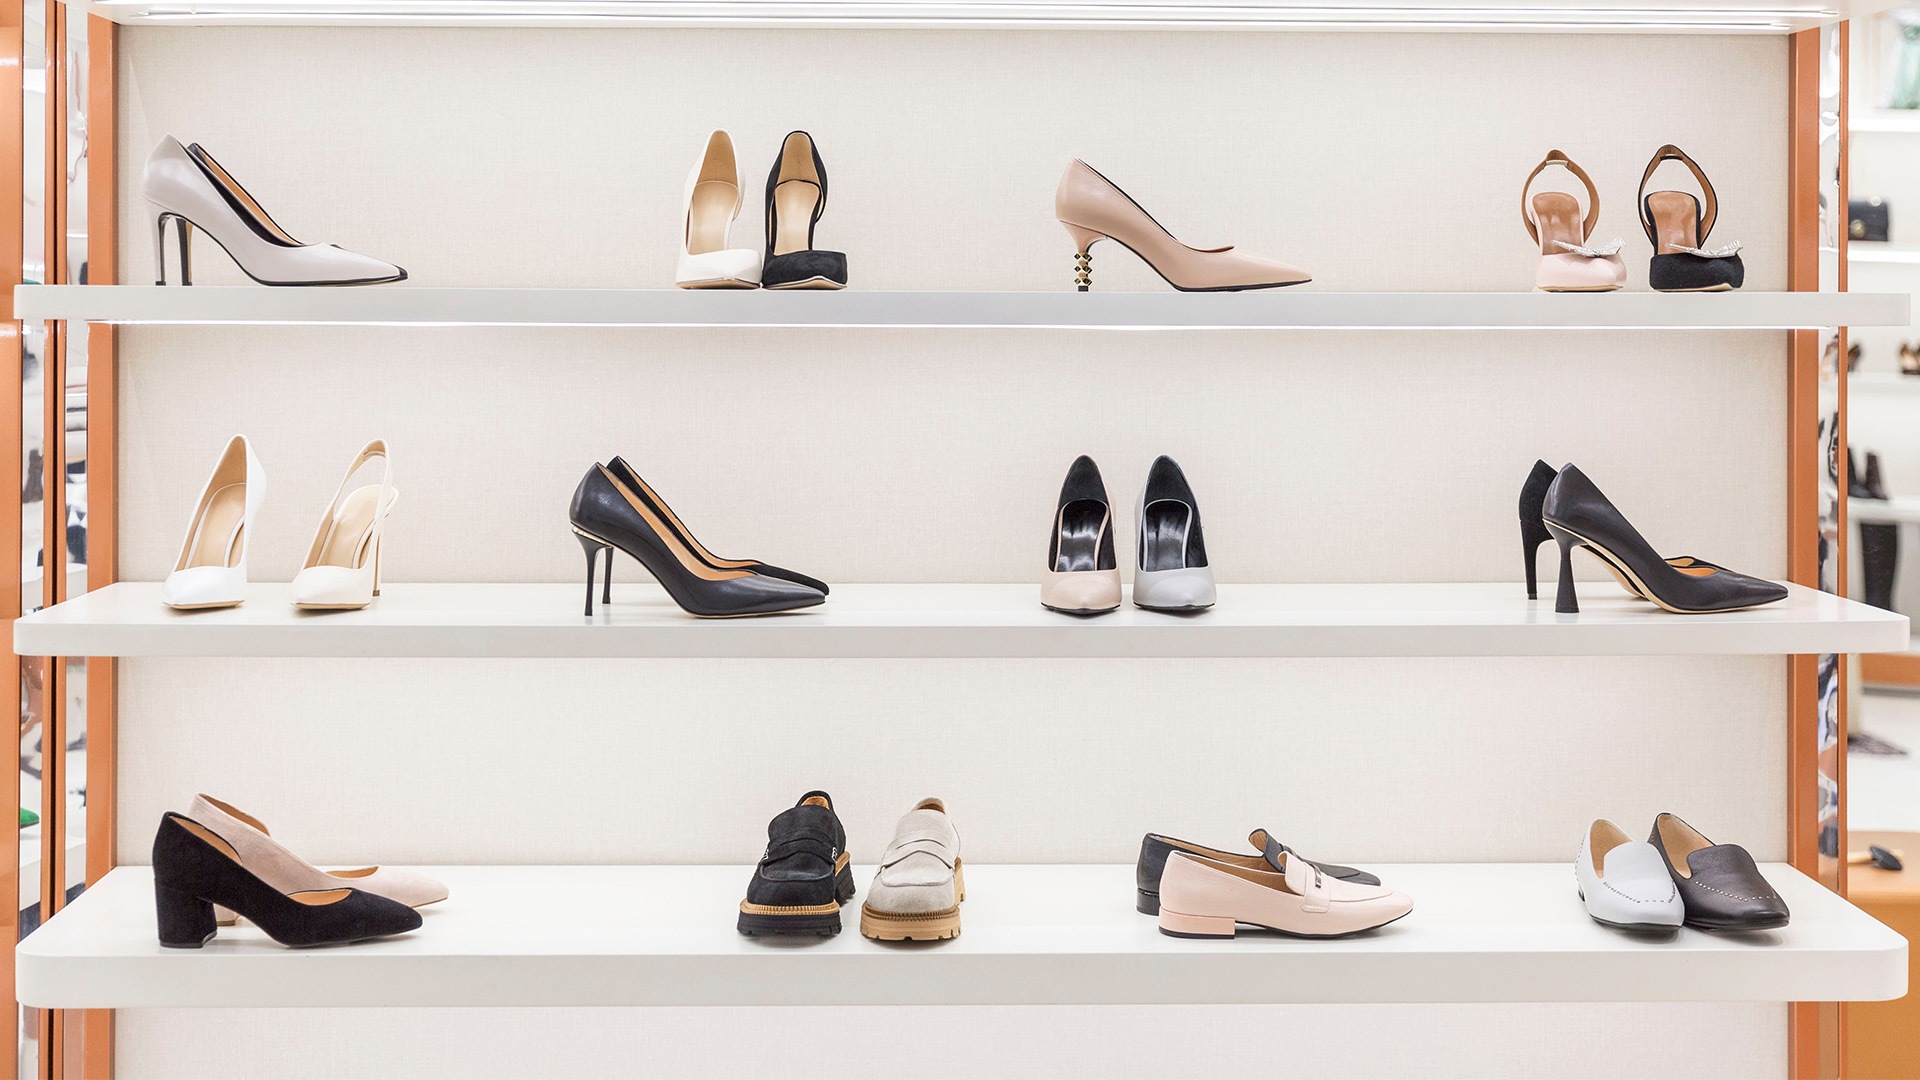 Variety of women heels from a luxury shoe brand in Singapore, arranged on a shelf for display